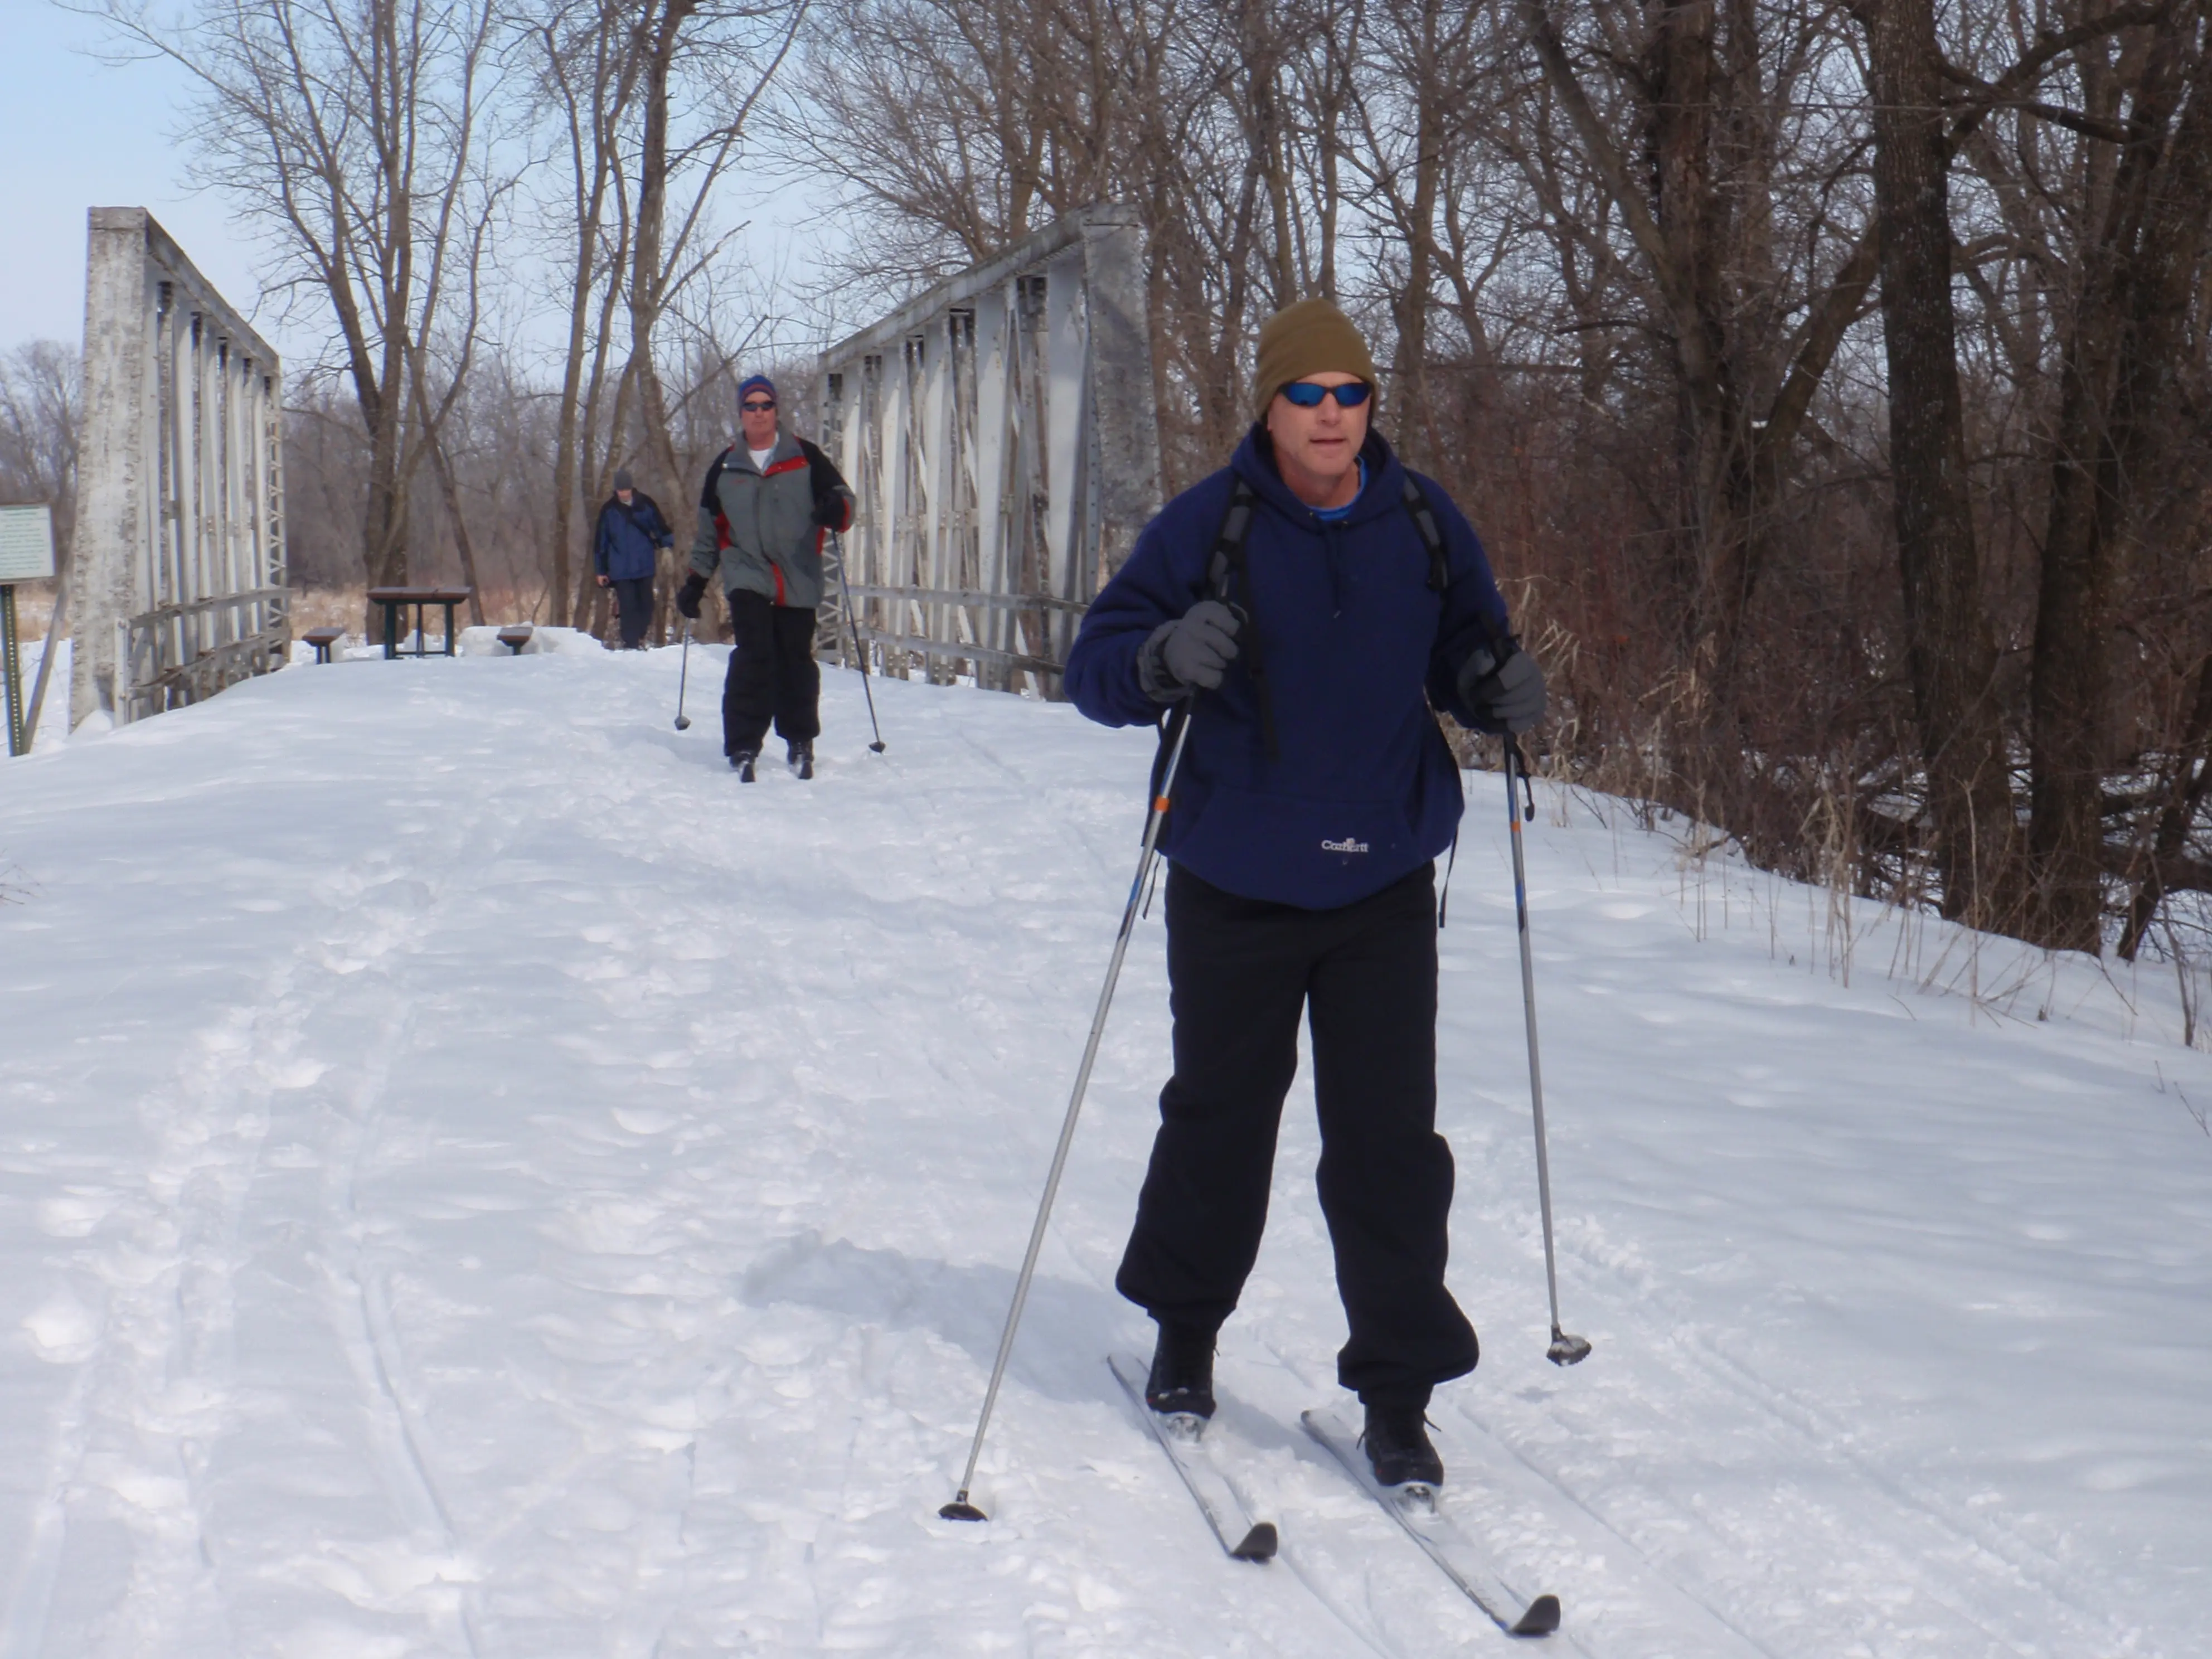 An older white man cross-country skis as other skiers cross a bridge behind him.